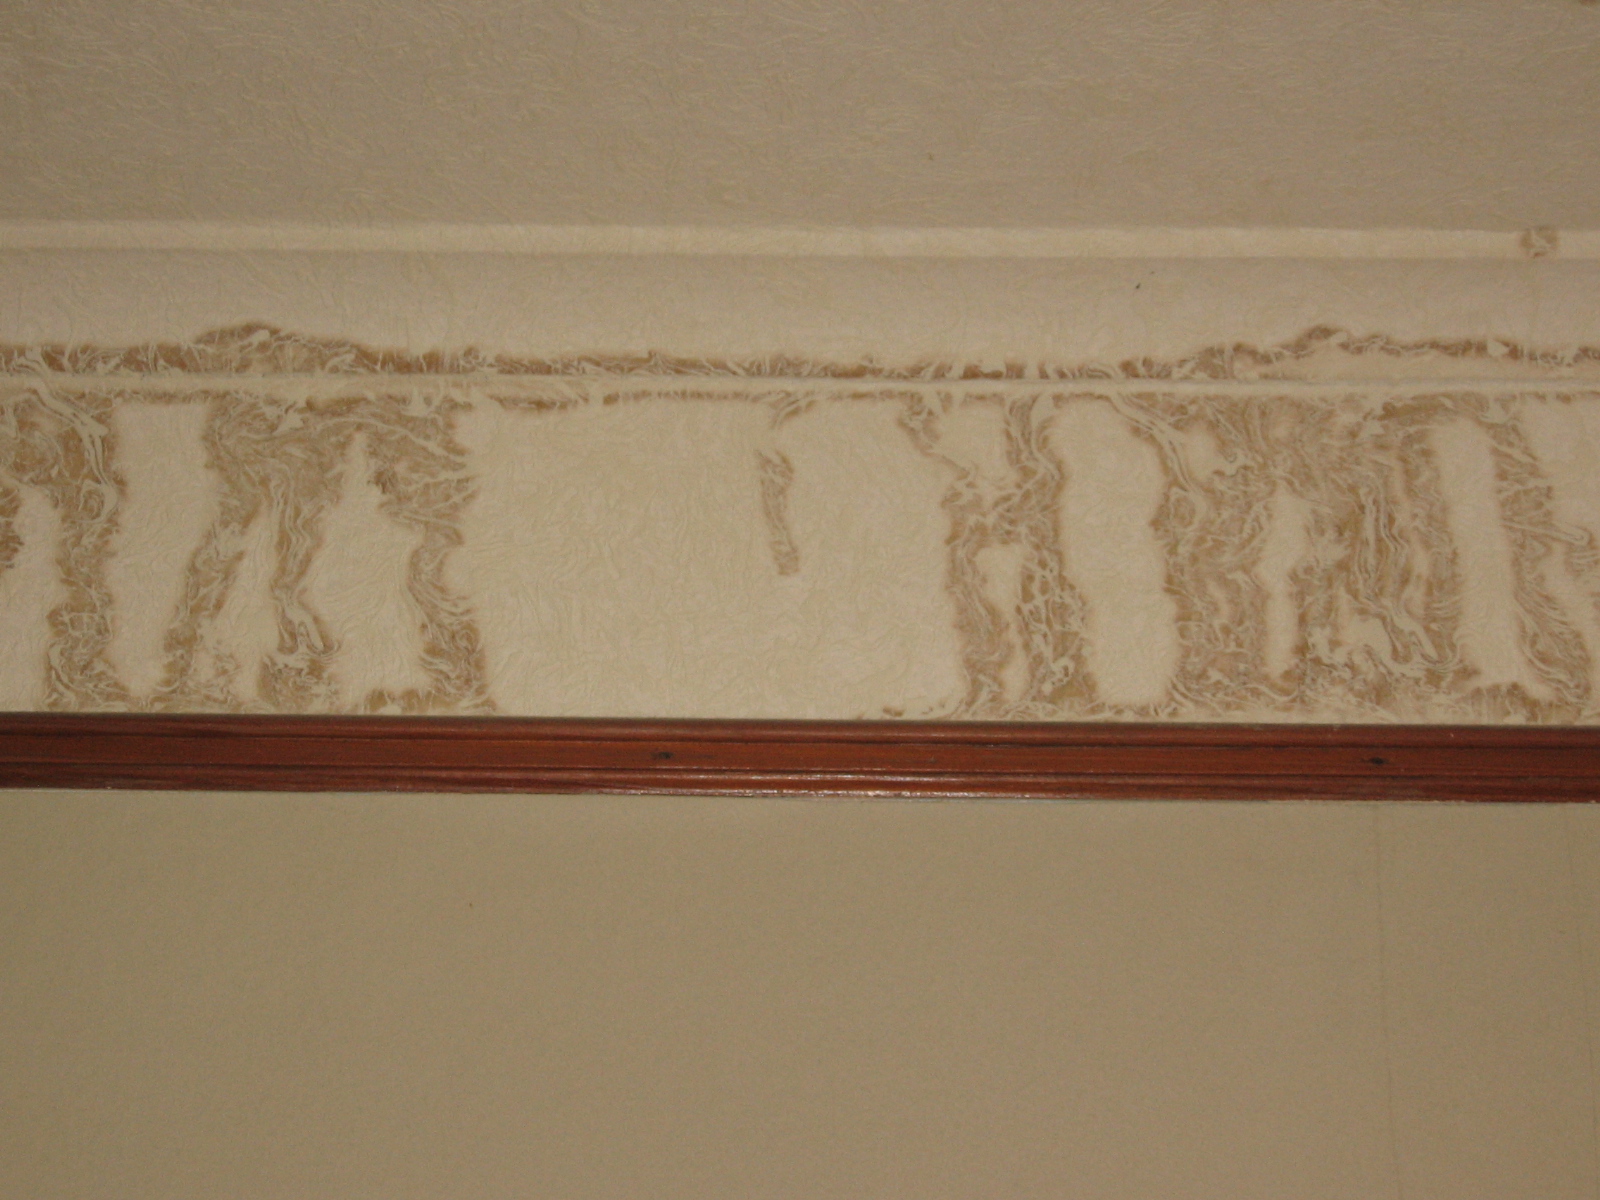 Water Stains on Wall